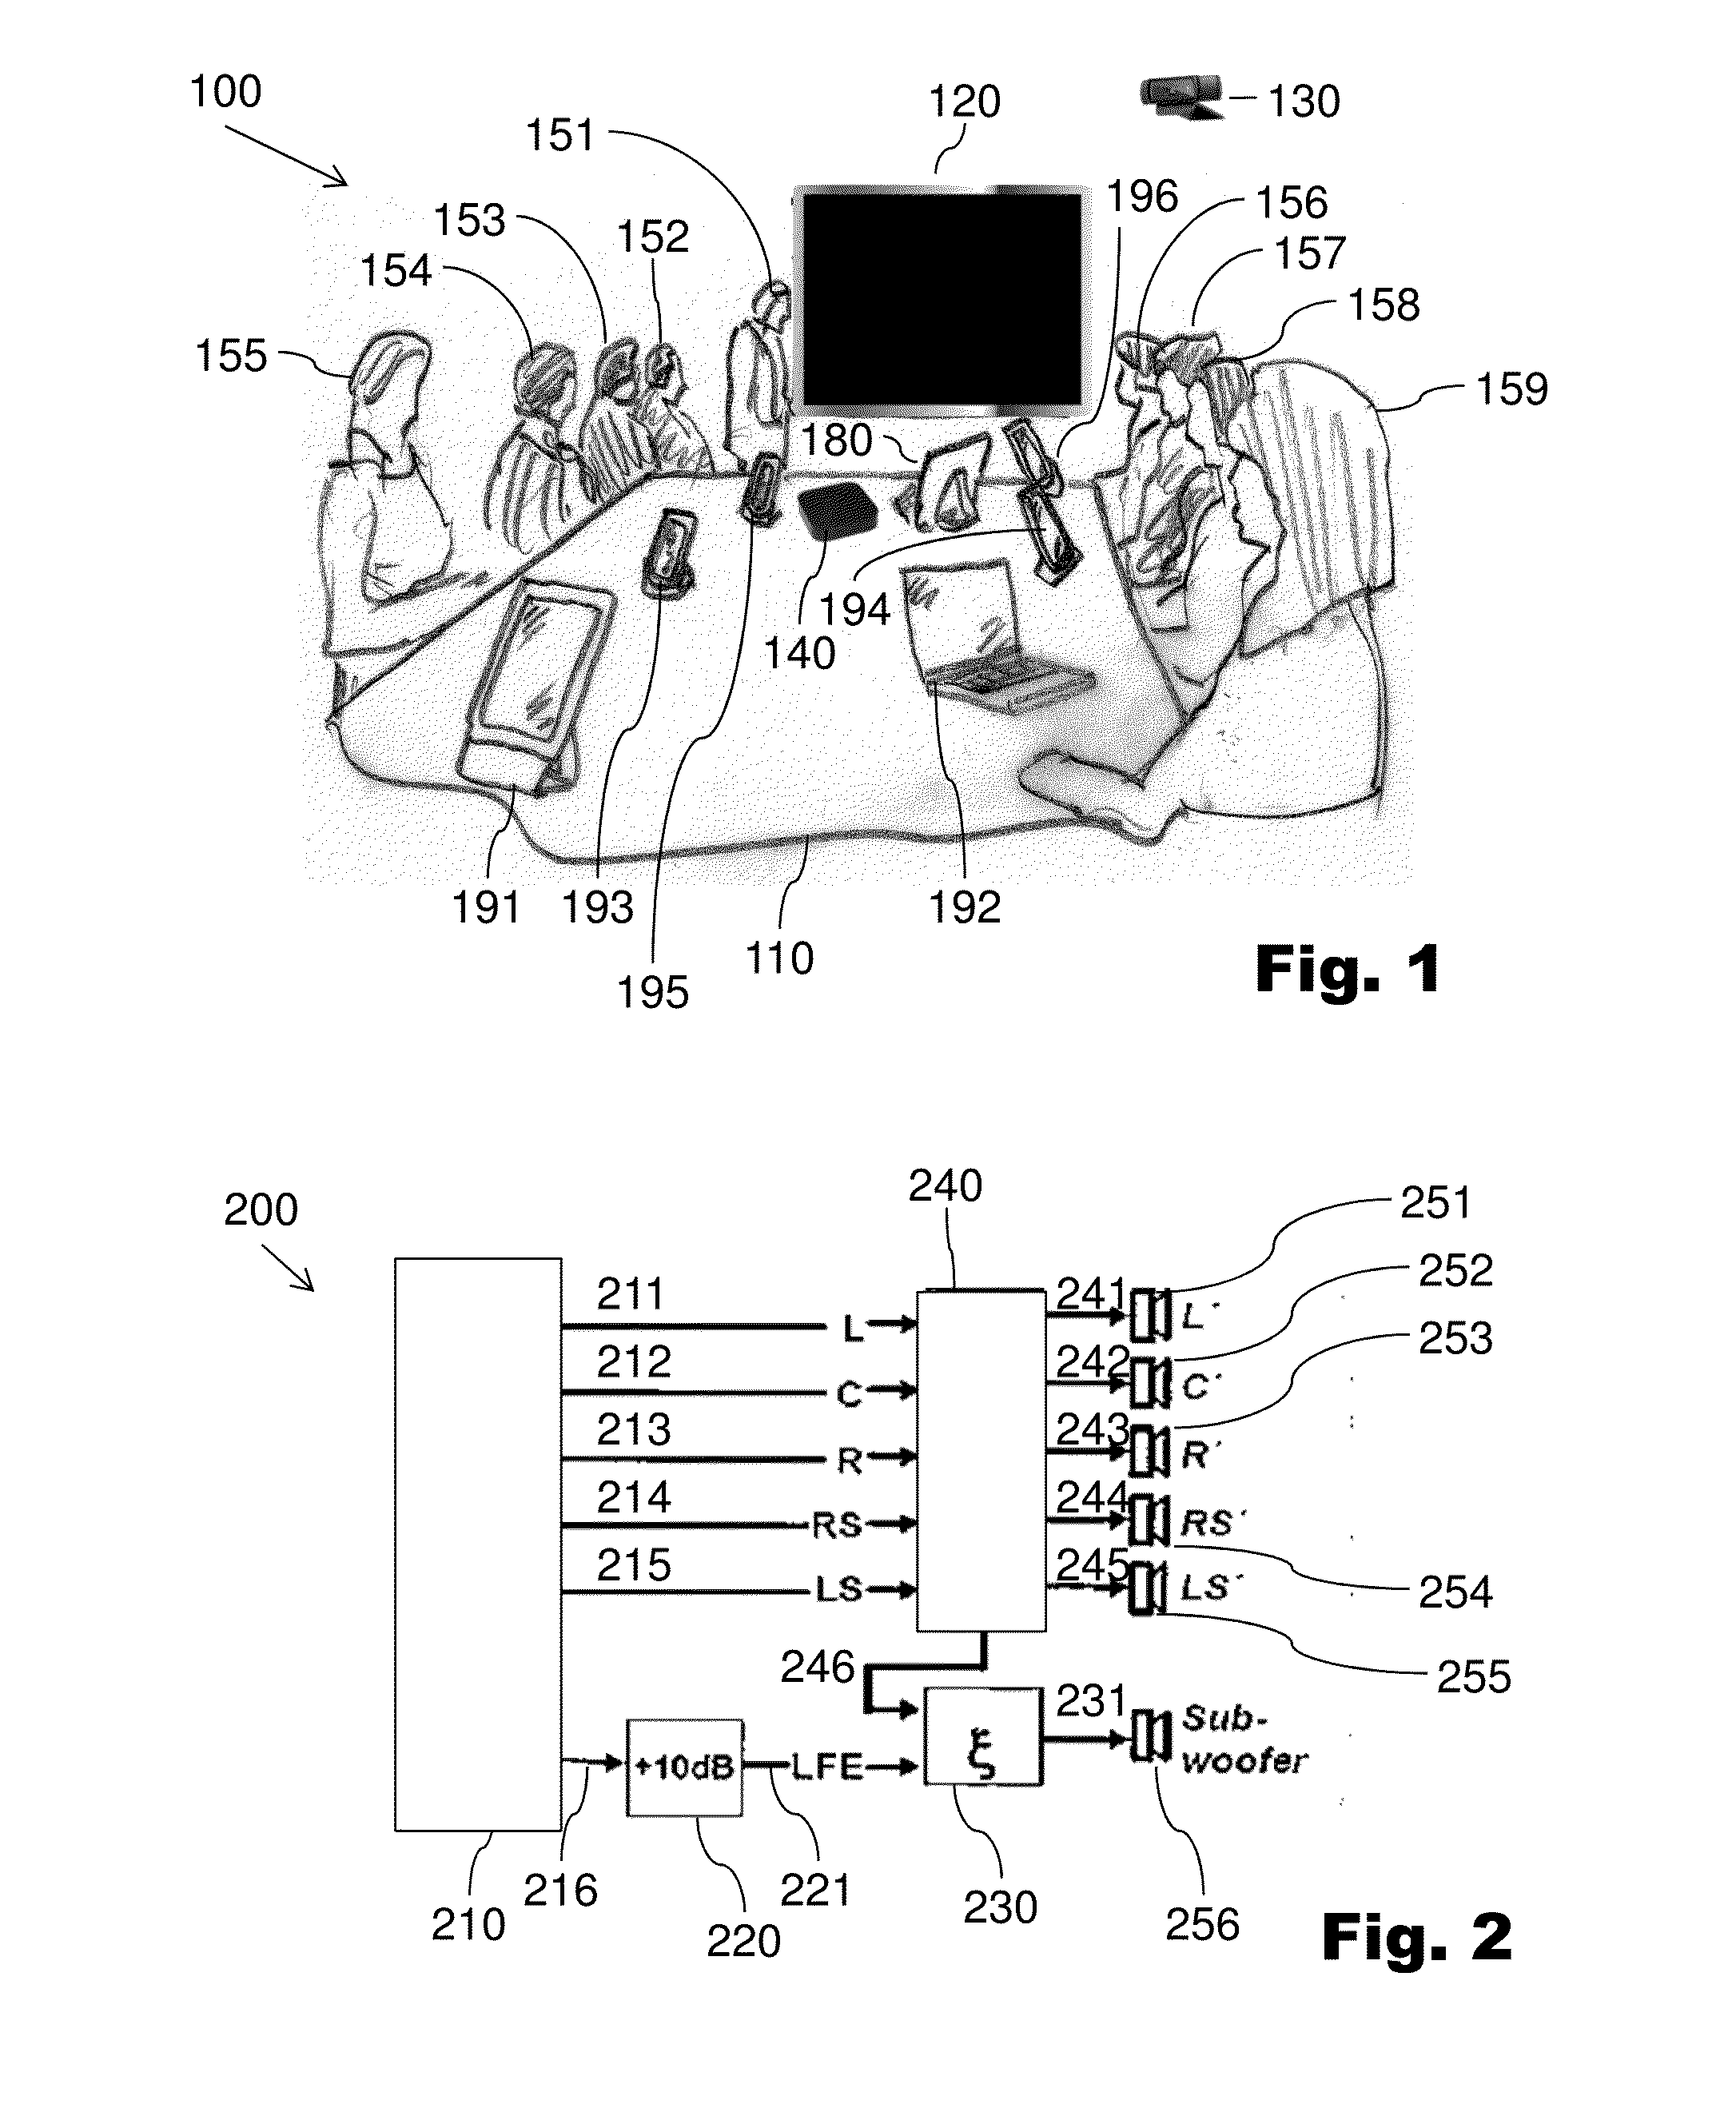 Method, device, and system for managing a conference